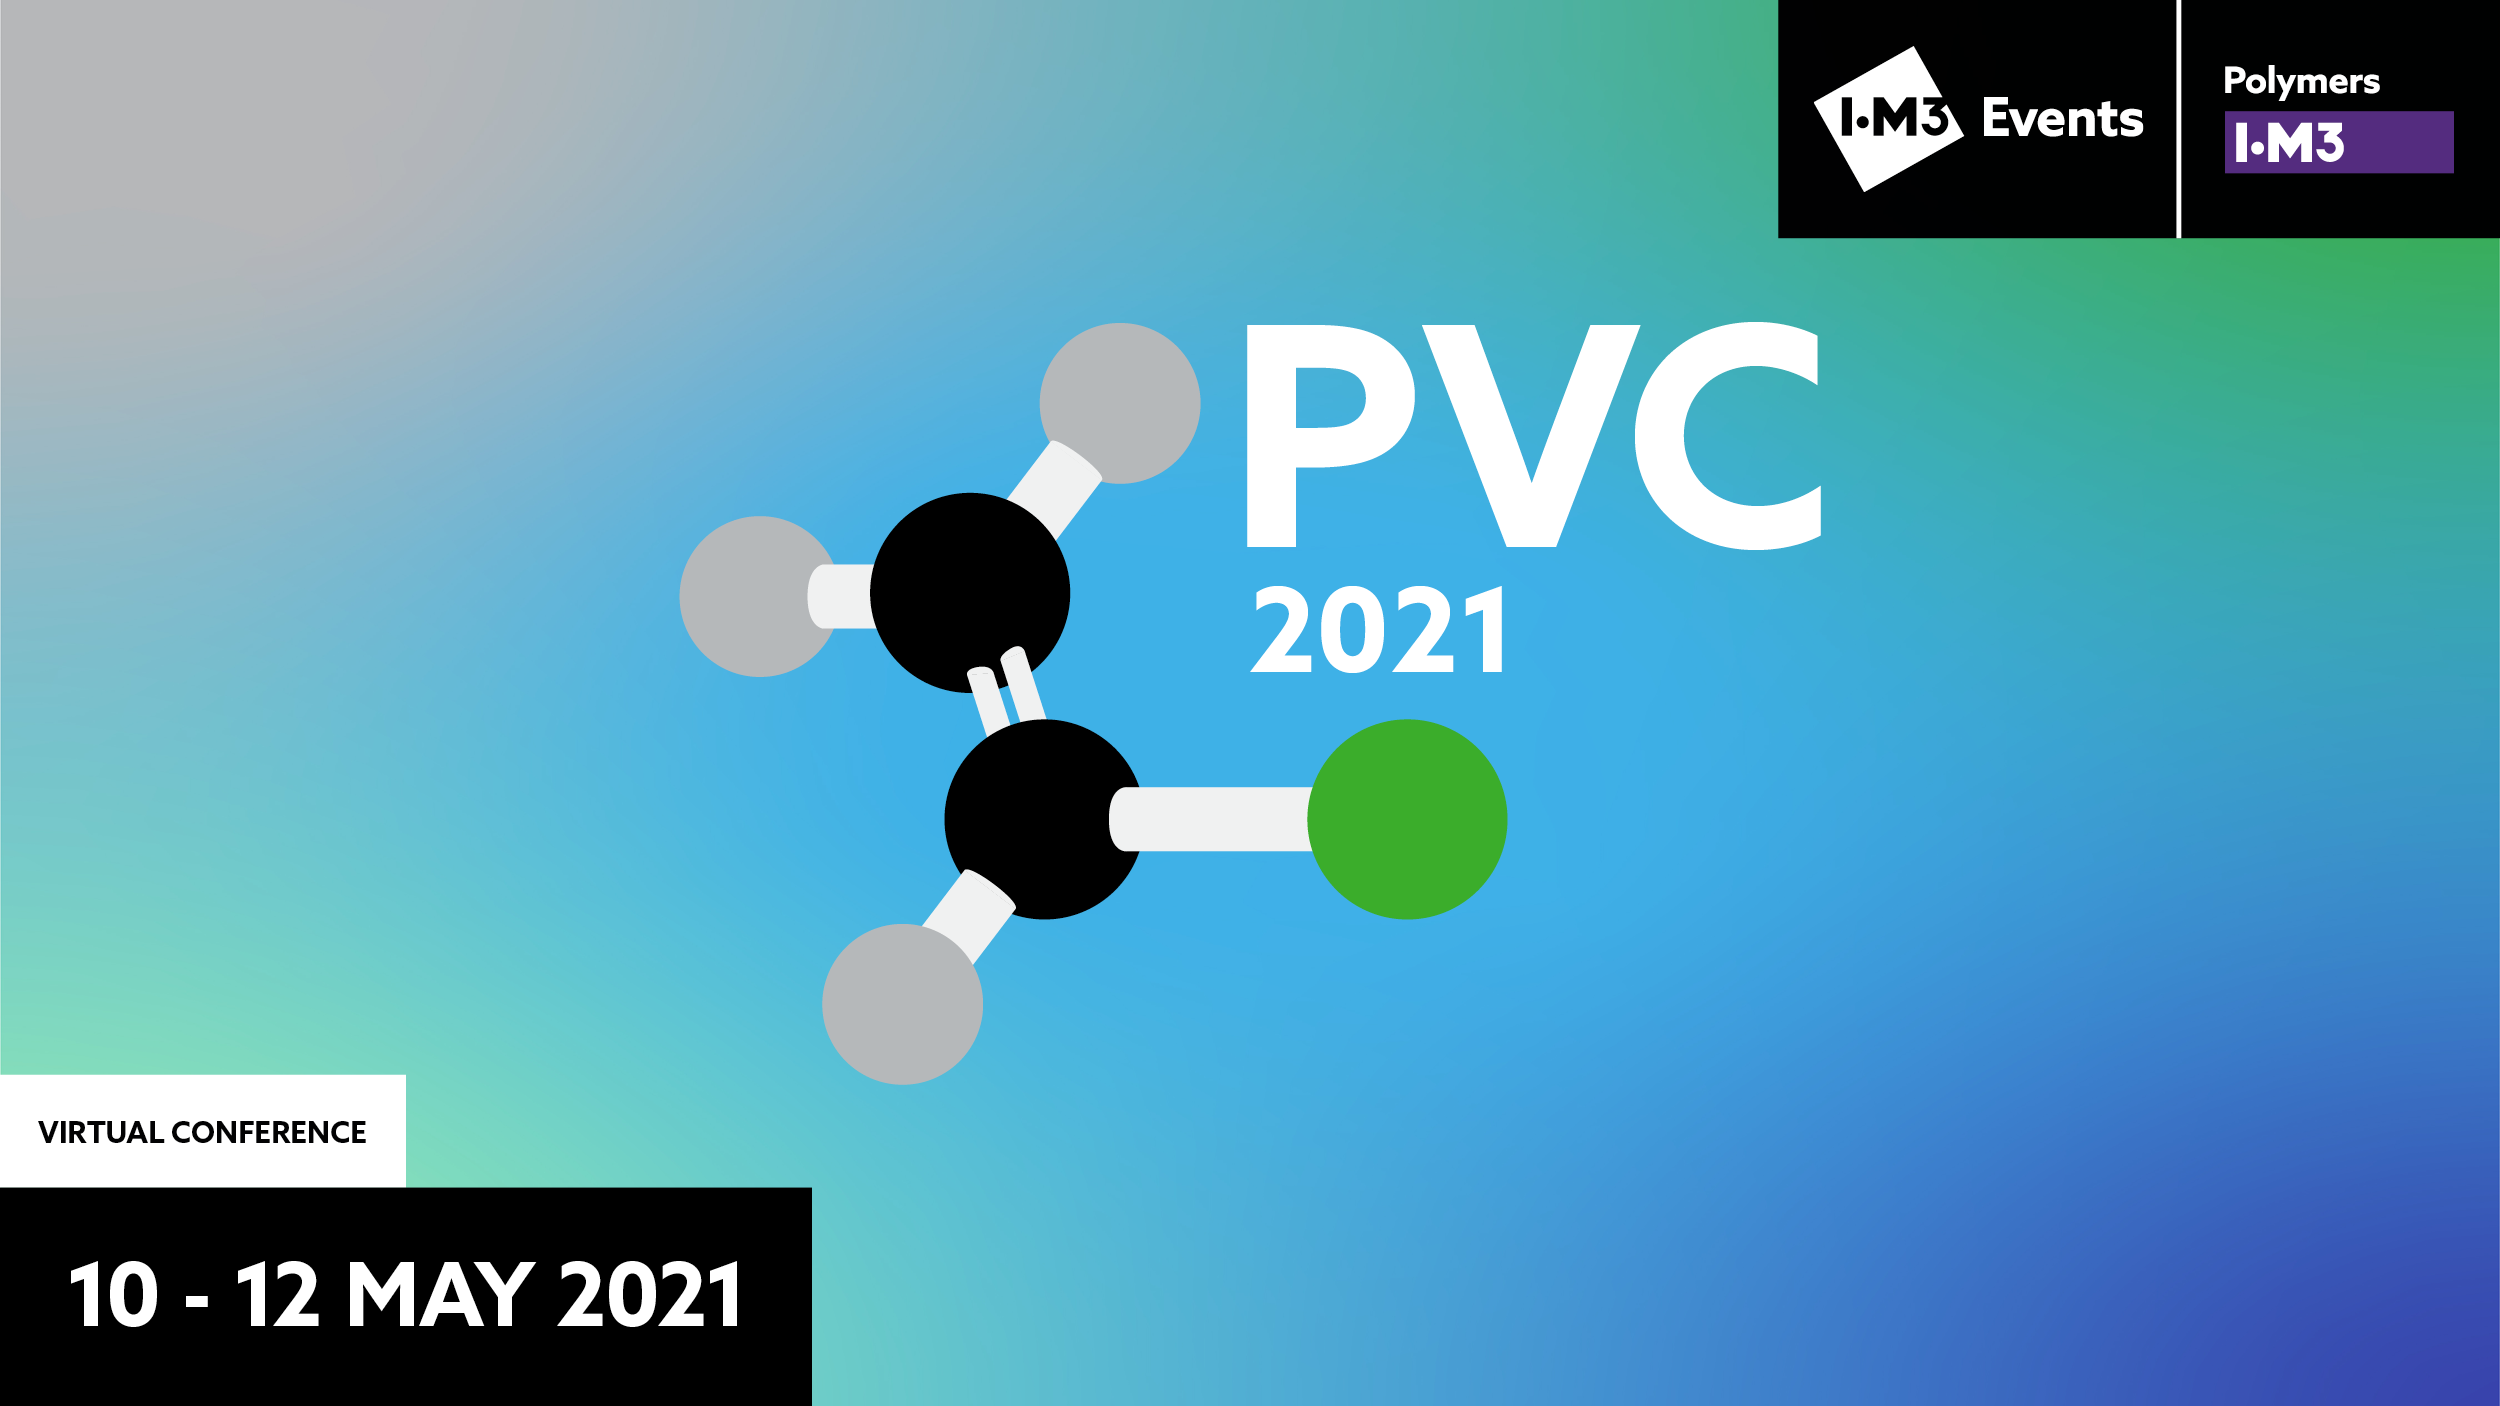 Emery Oleochemicals’ Green Polymer Additives Business to Present Latest High-Performance Lubricants Research at PVC 2021 Conference 